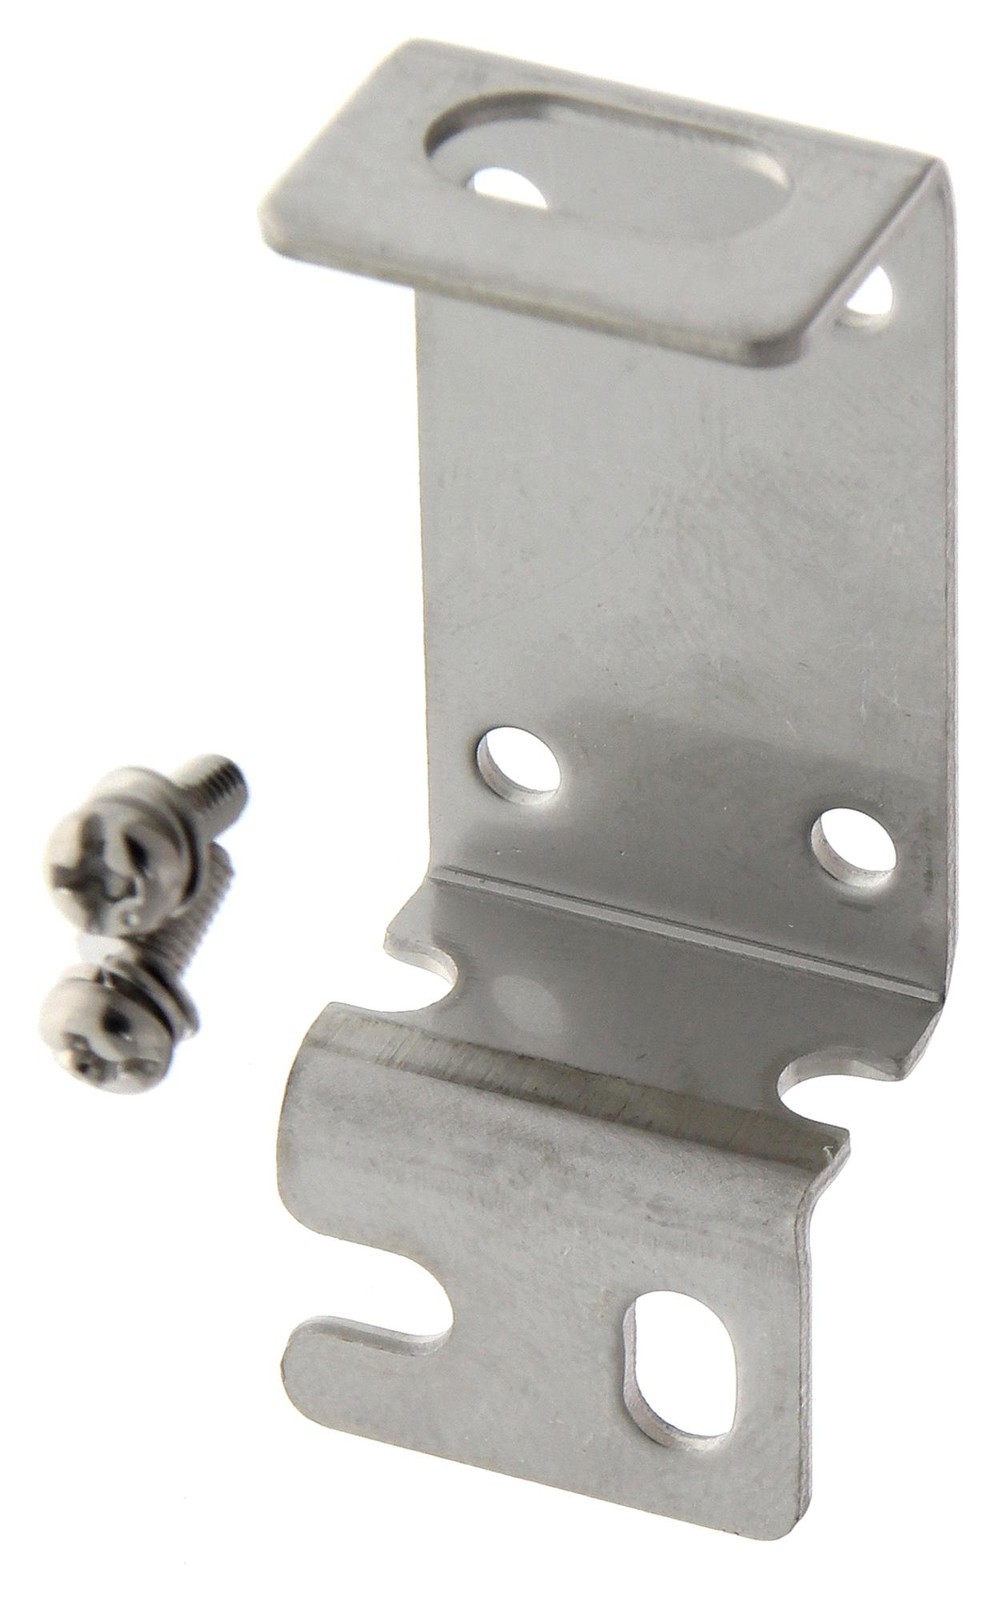 Omron Industrial Automation E39L142 Mount Bracket, Sensor, Stainless Steel